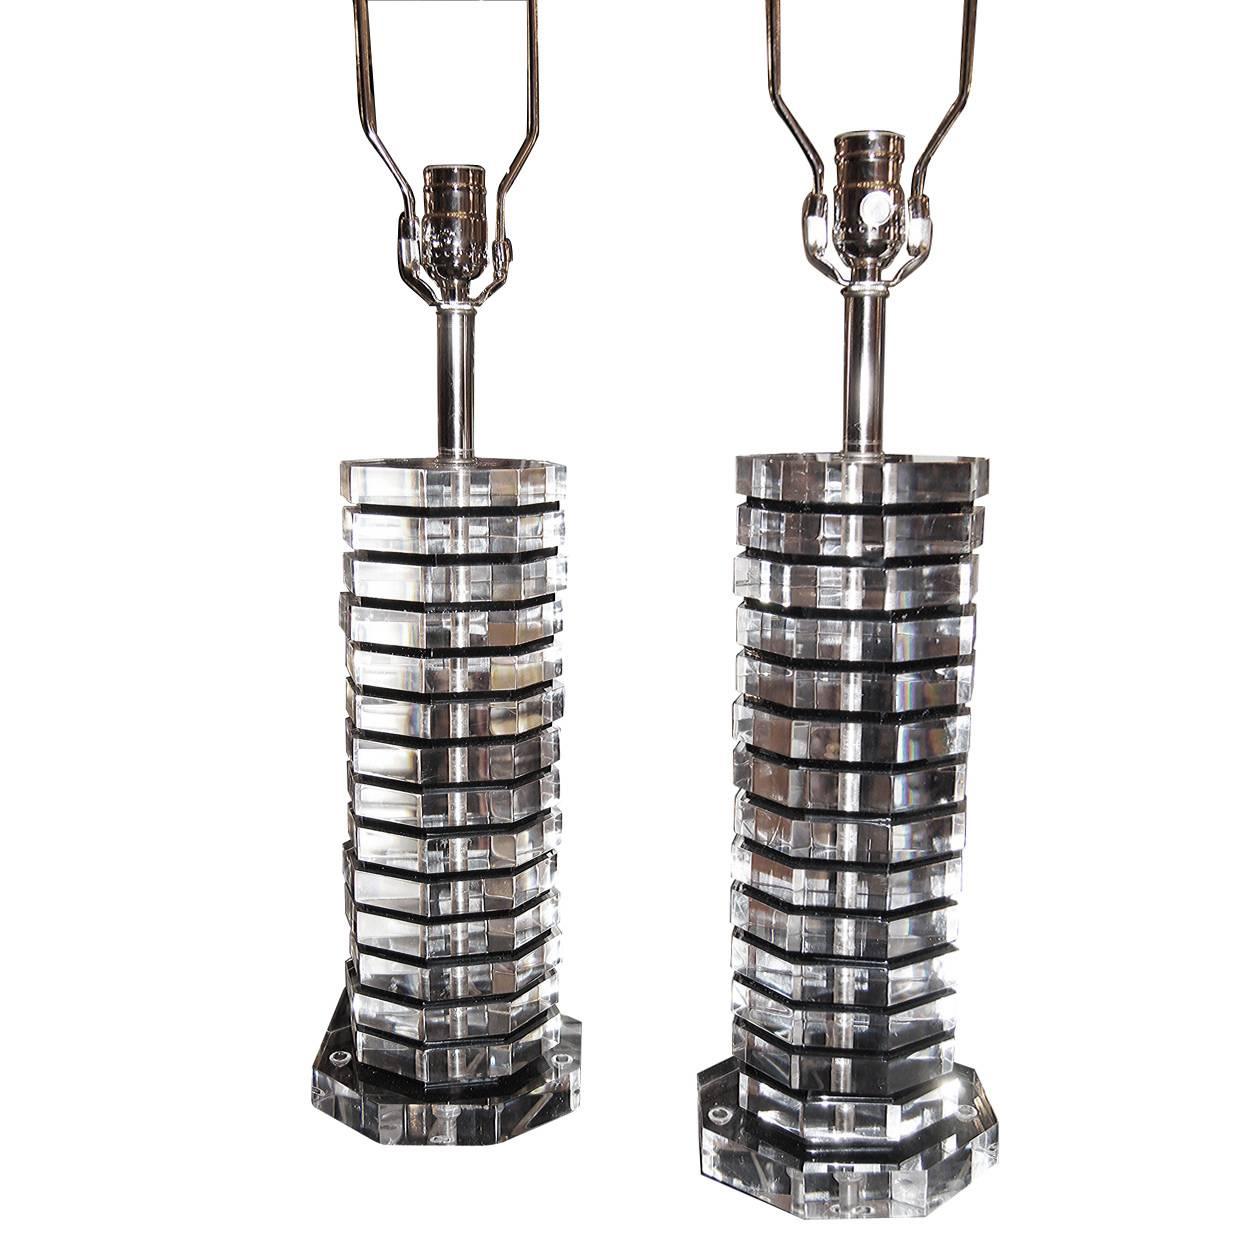 Pair of circa 1960s French Lucite lamps, black and clear Lucite bodies.

Measurements:
18